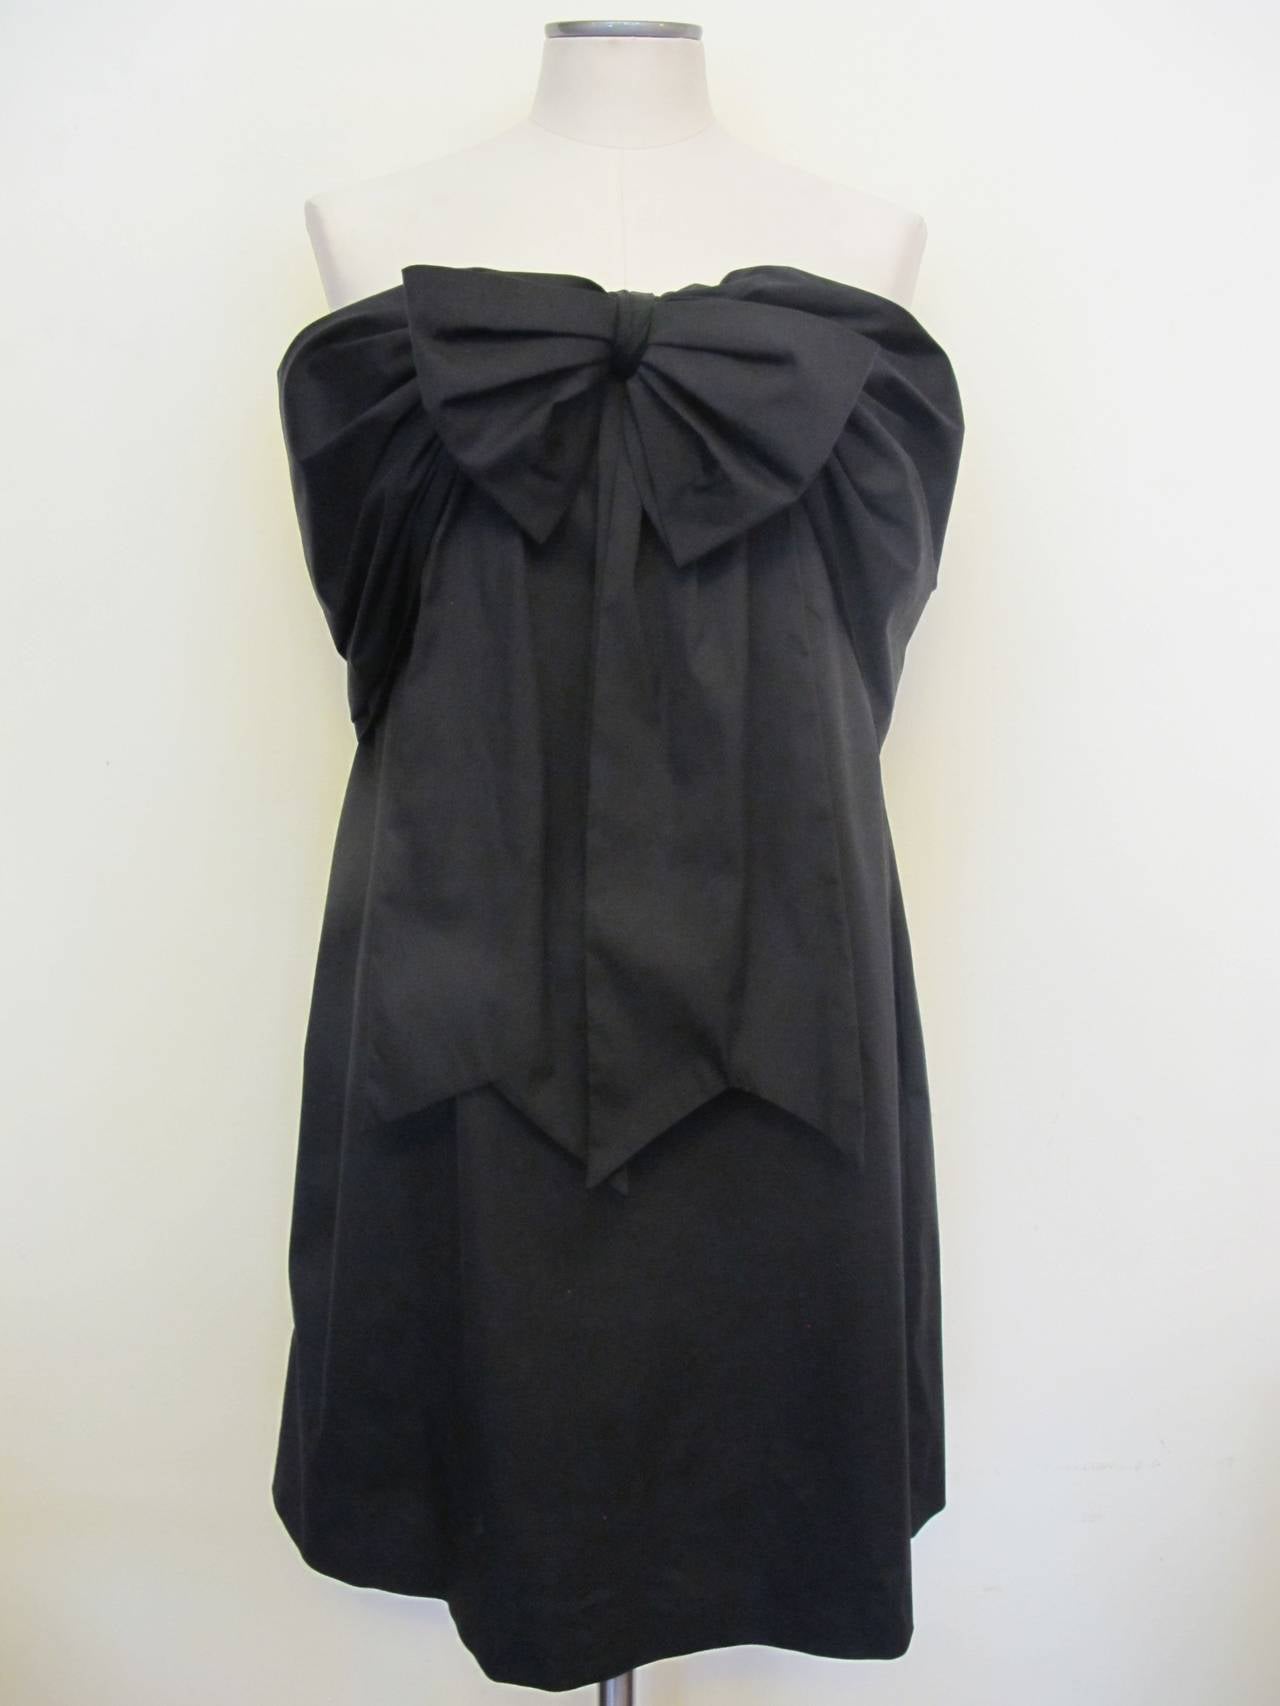 This Jean Paul Gaultier off the shoulder or strapless dress is truly divine on the body - chic - comfortable - elegant! There are two useful pockets on the hip and 1 pocket by the left breast. It is collectable since Jean Paul Gaultier is no longer